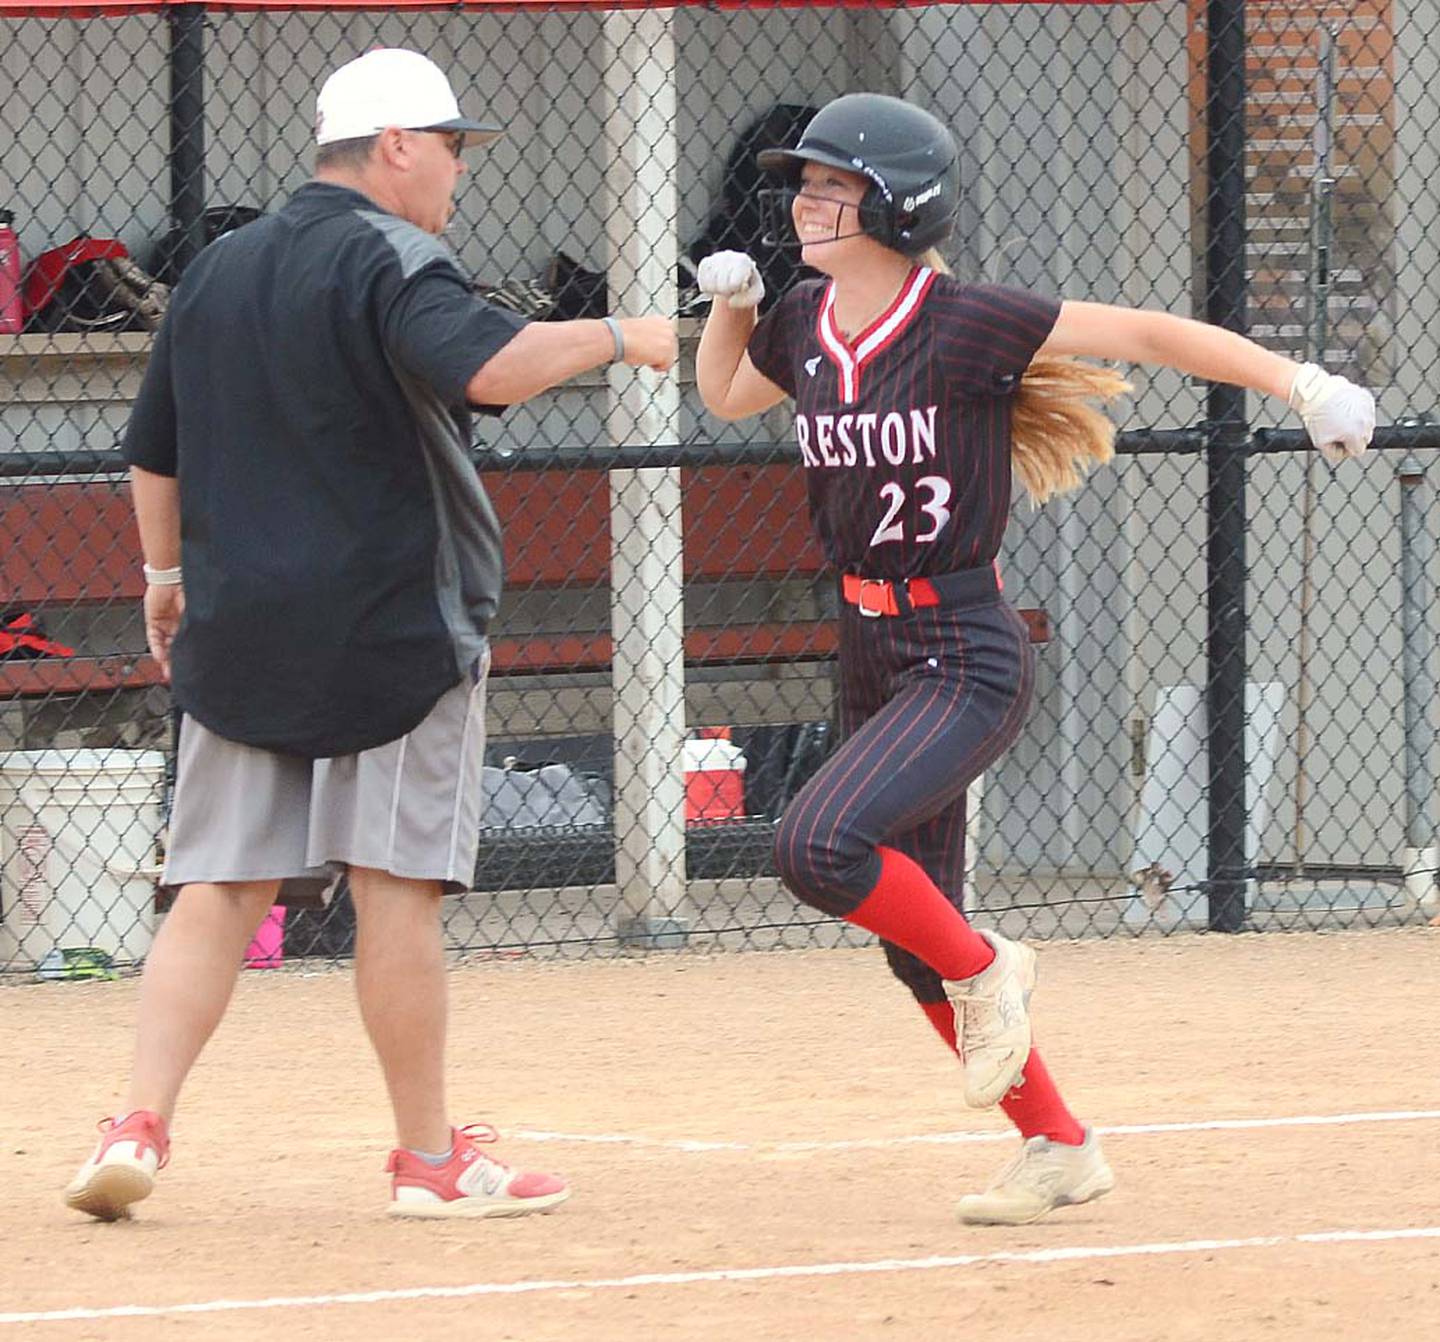 Creston's Avery Staver looks to her teammates at home plate after getting a fist bump from coach Dave Hartman for hitting a home run in the second inning Thursday. Staver had three hits in the 11-1 victory.